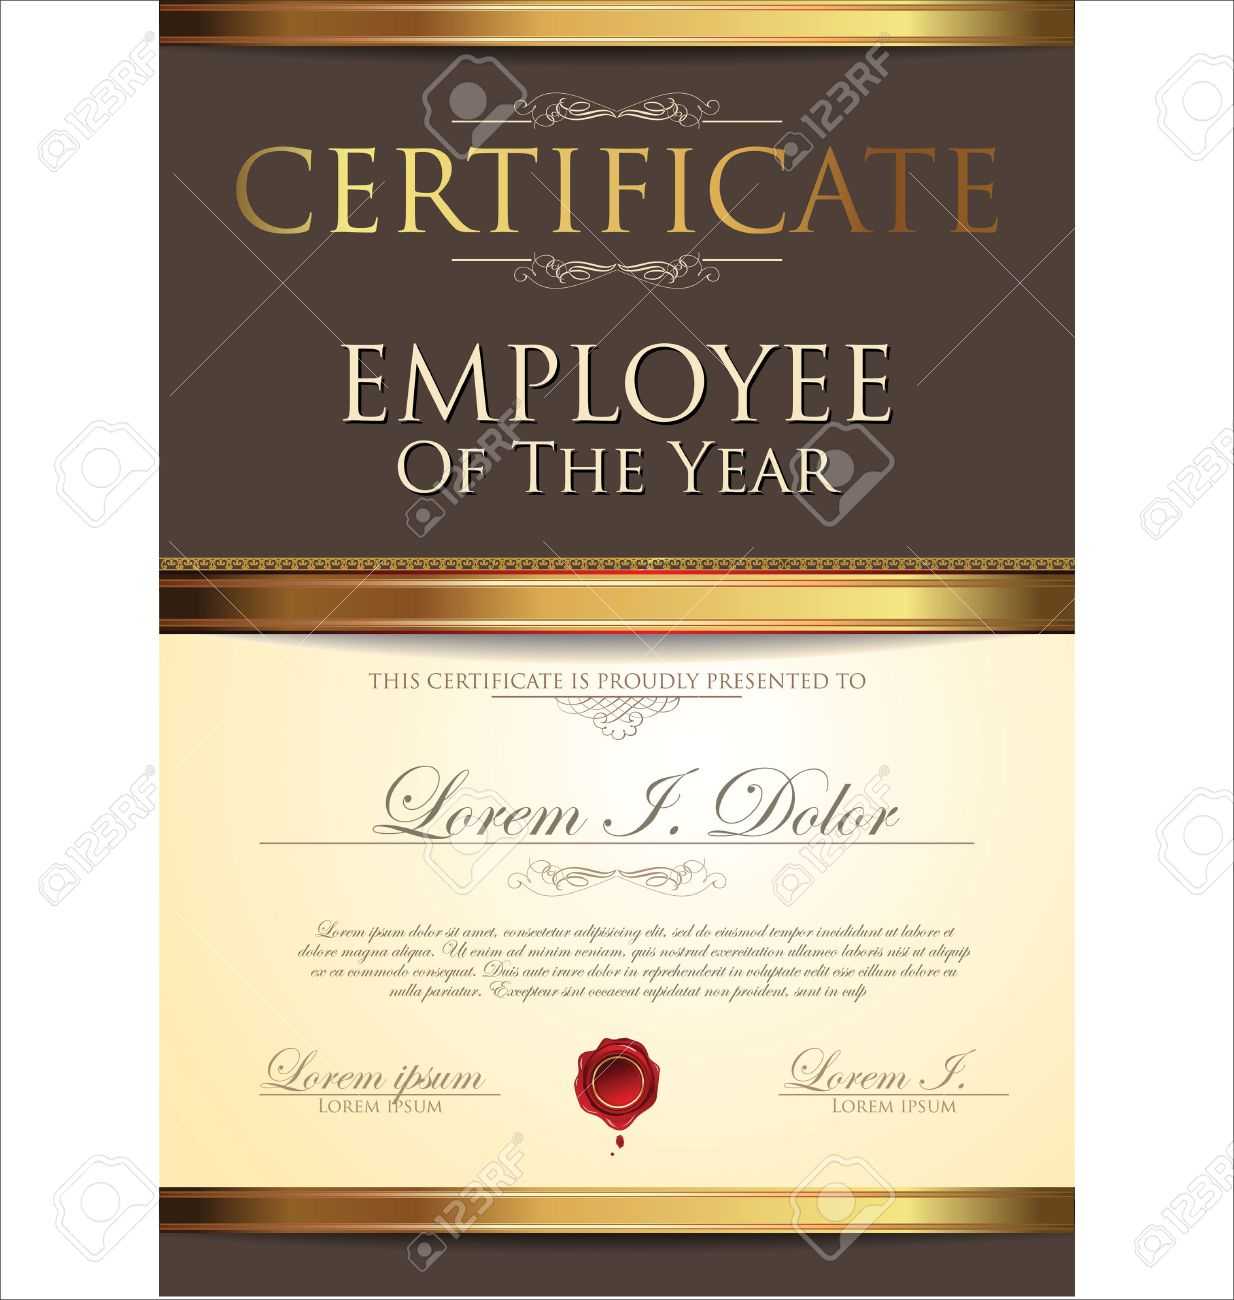 Certificate Template, Employee Of The Year In Employee Of The Year Certificate Template Free